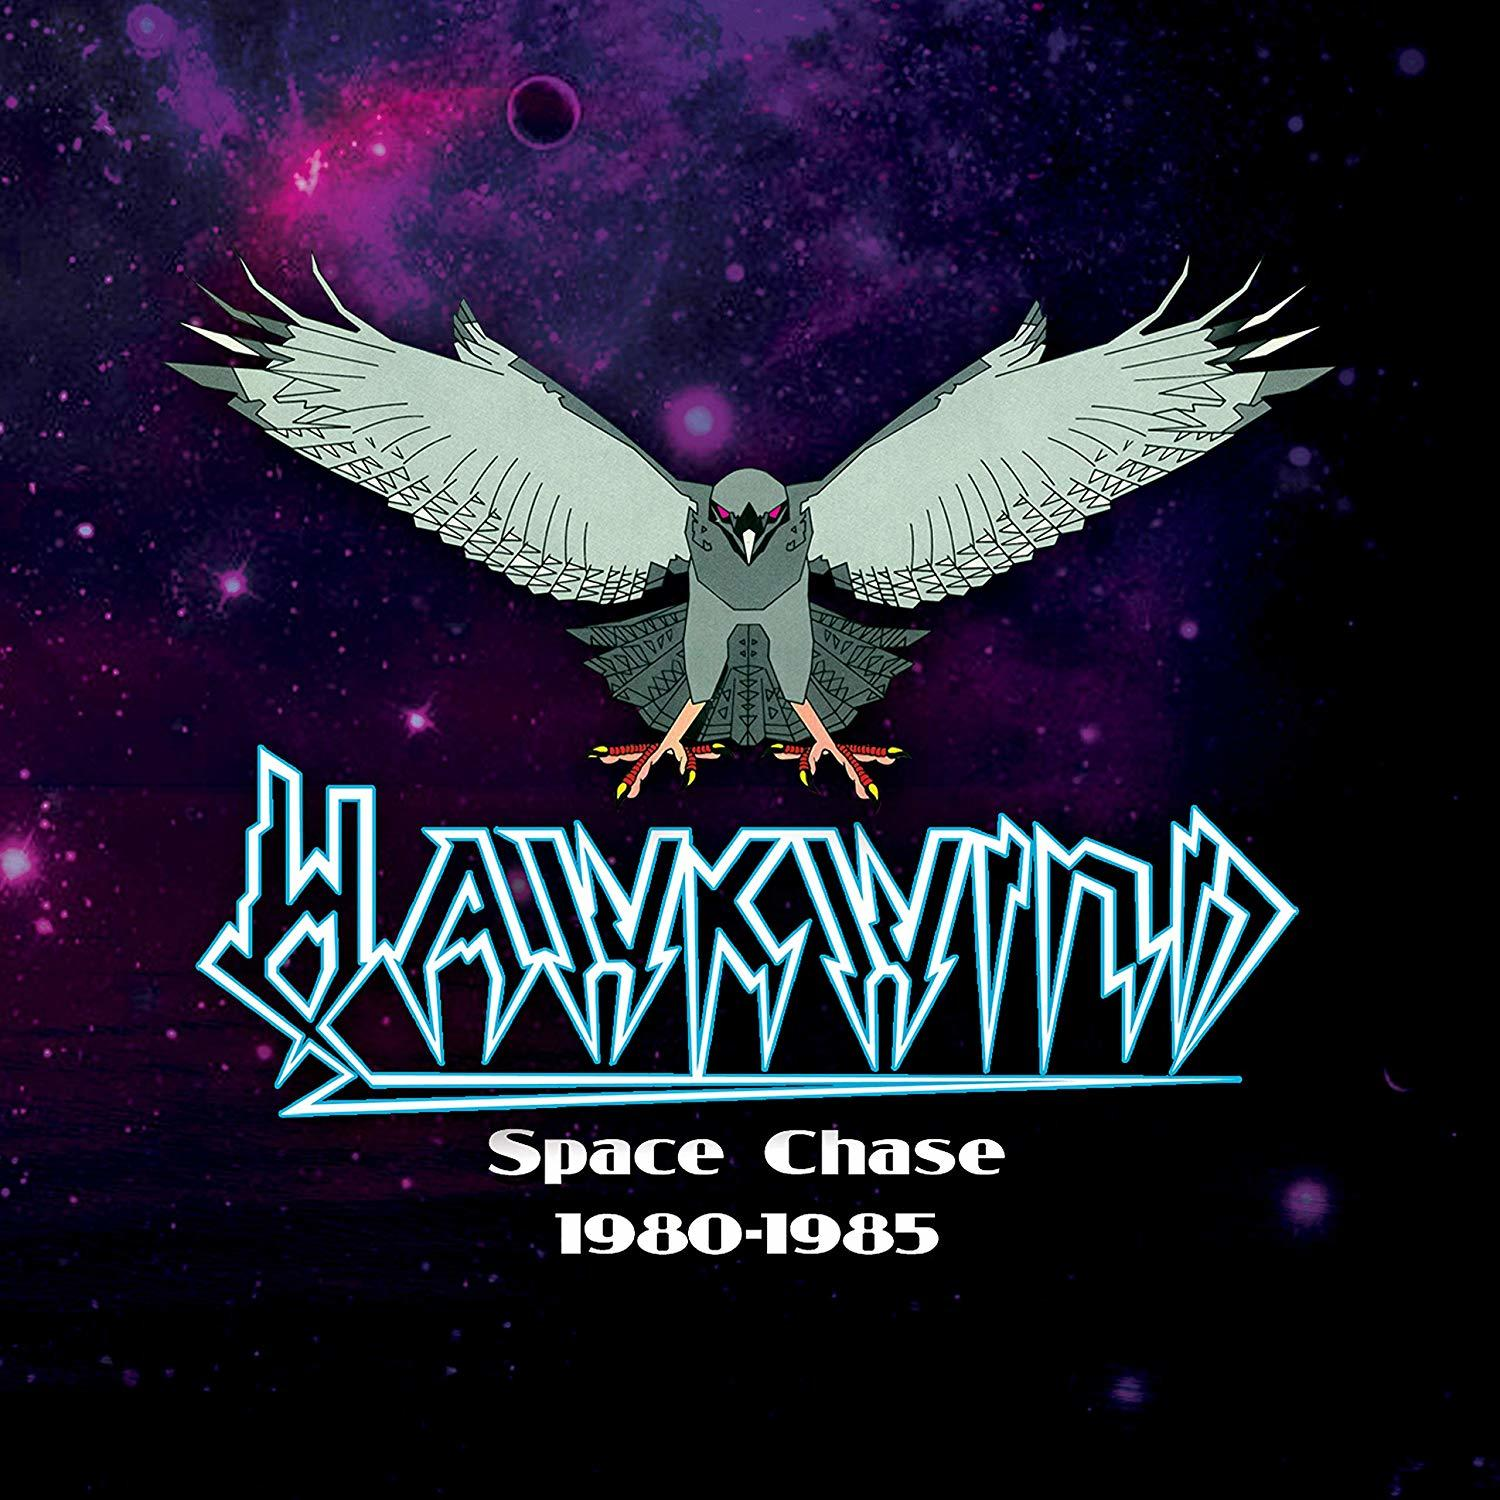 - SPACE 1980-1985 Hawkwind CHASE - (CD)